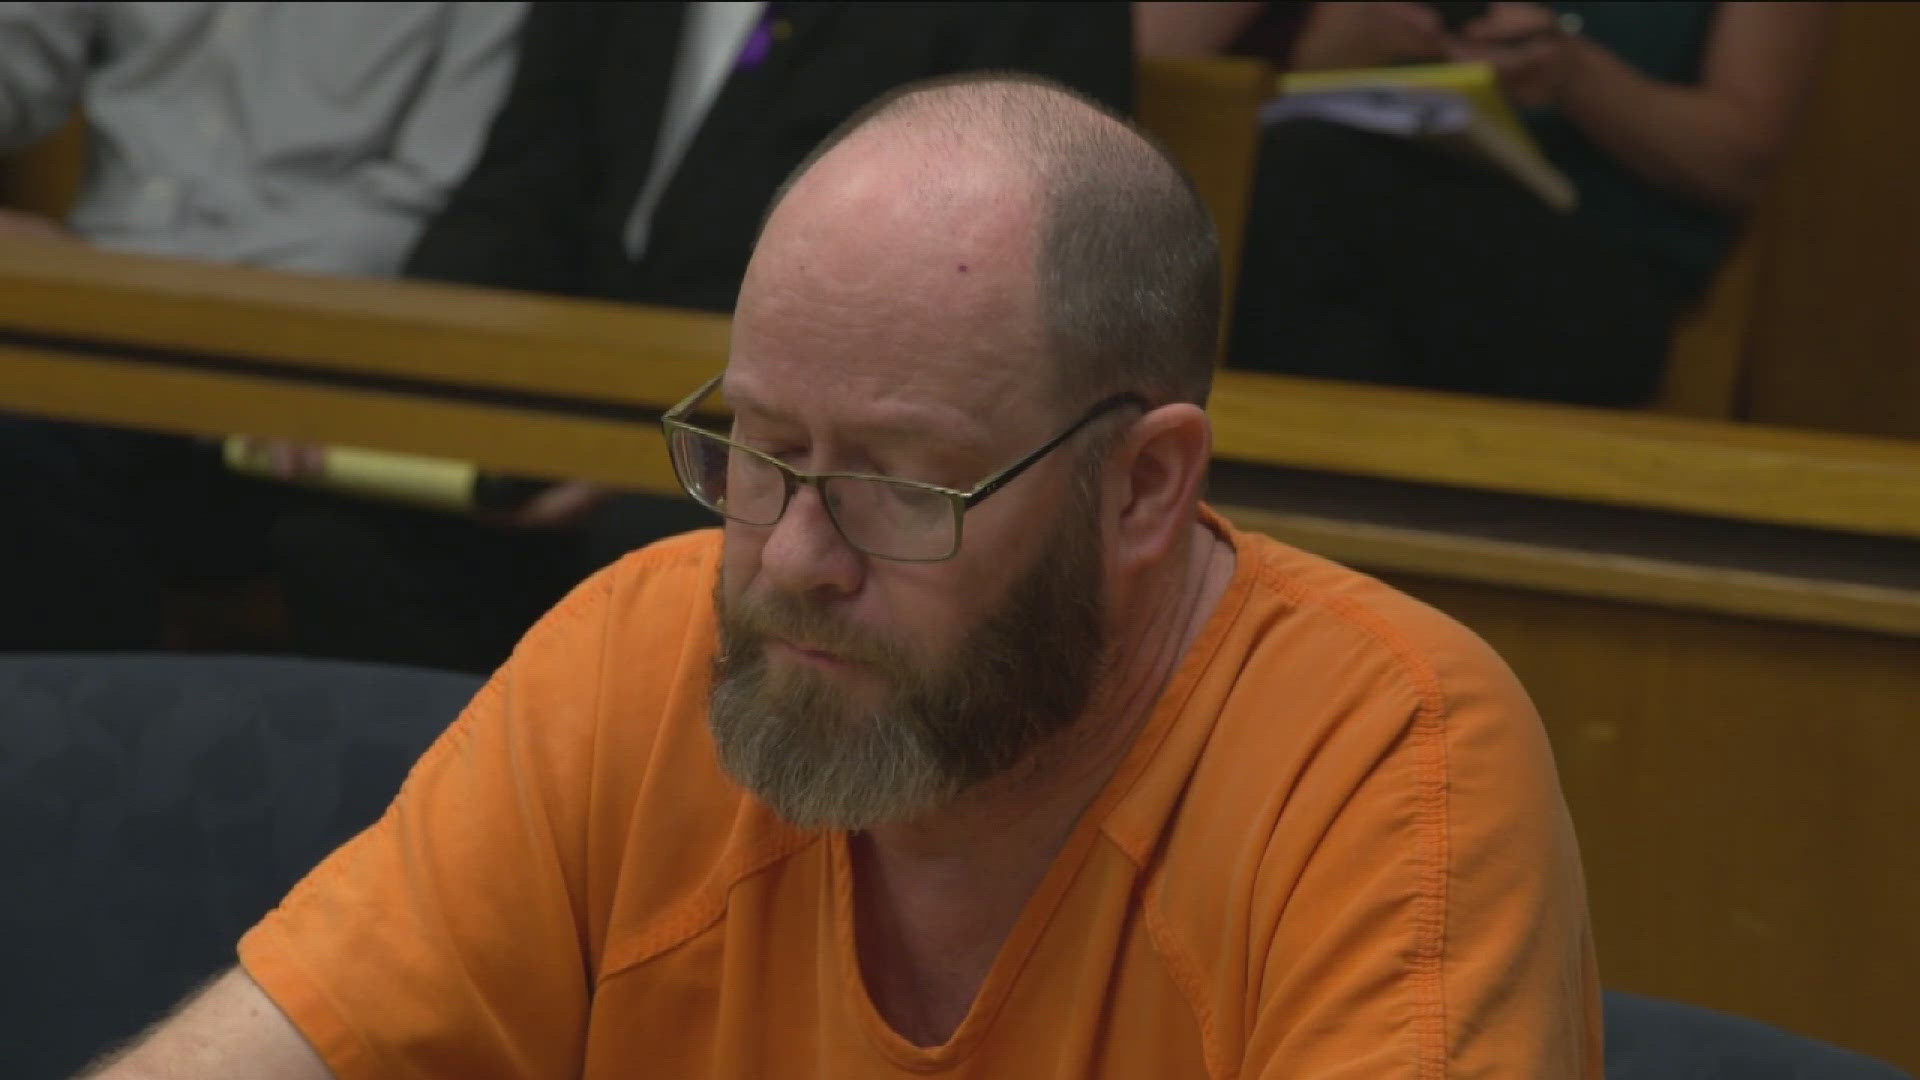 The hearing will determine if Dale Warner faces a murder trial in the homicide of his wife, who has been missing since 2021 and was declared dead in March.